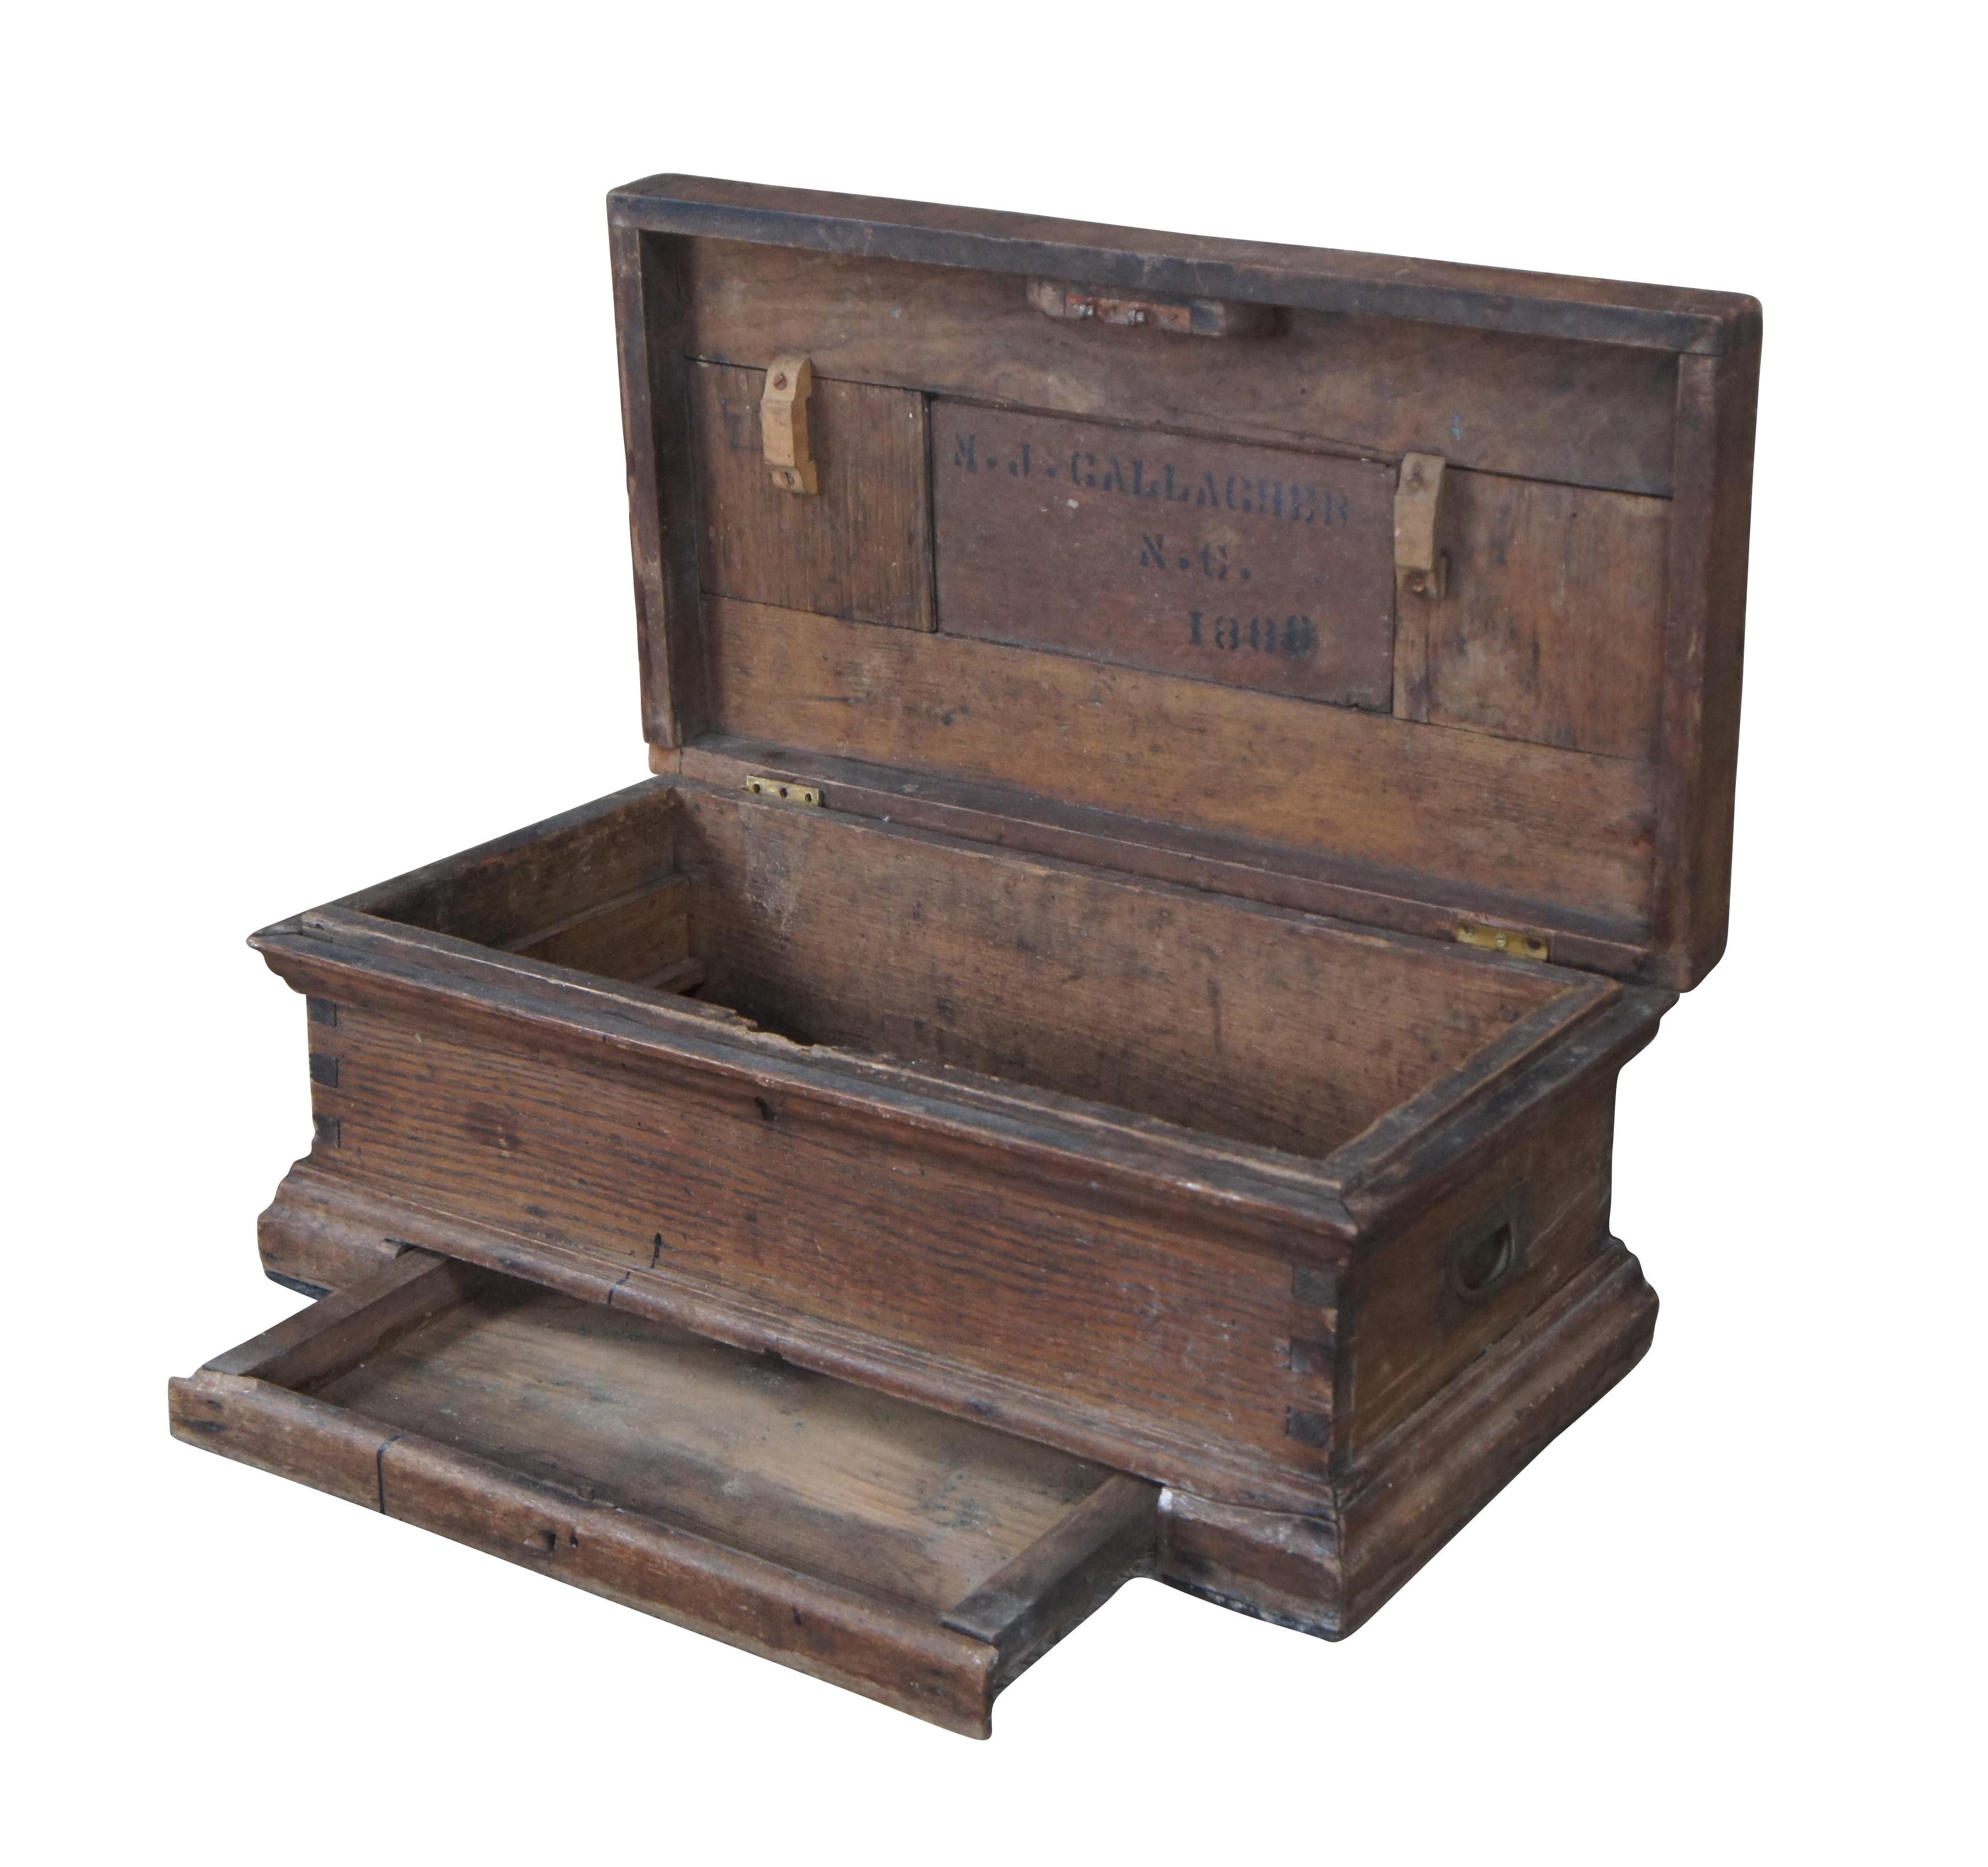 A charming late 19th century tool chest from M.J. Gallagher of North Carolina, Dated 1888. The trunk appears to be a carpenter or machinists trunk but could have also been used in military setting. Made from oak with finger-tailed construction.